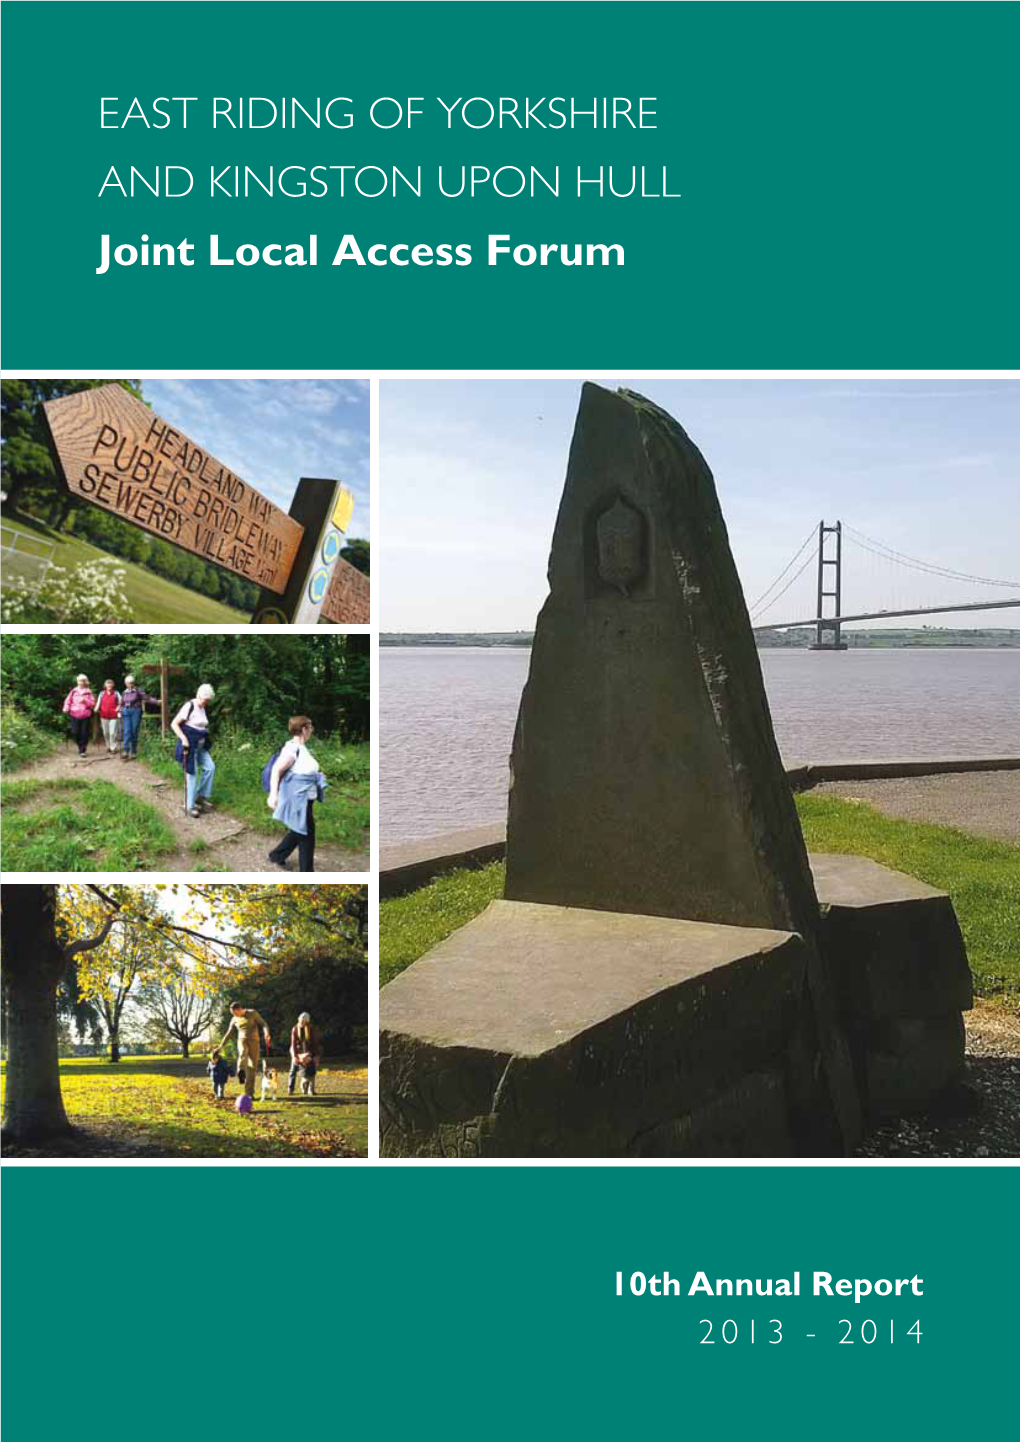 EAST RIDING of YORKSHIRE and KINGSTON UPON HULL Joint Local Access Forum